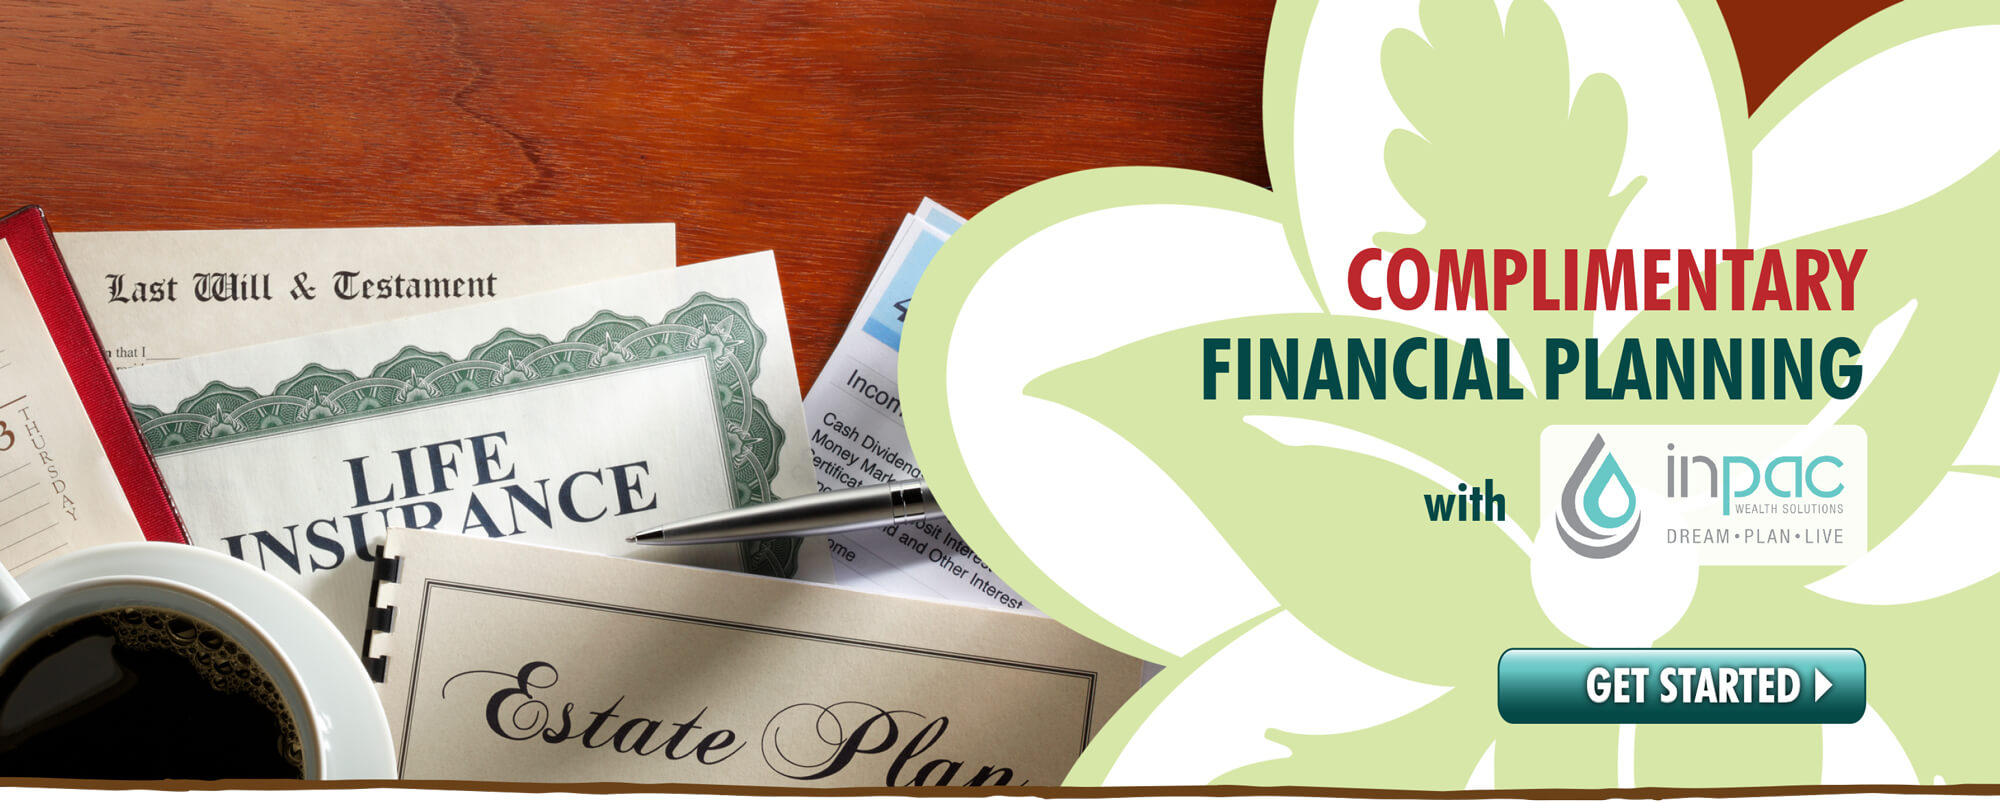 Schedule a FREE consultation with one of INPAC's Financial Advisors, courtesy of Hawaiian Financial Federal Credit Union.